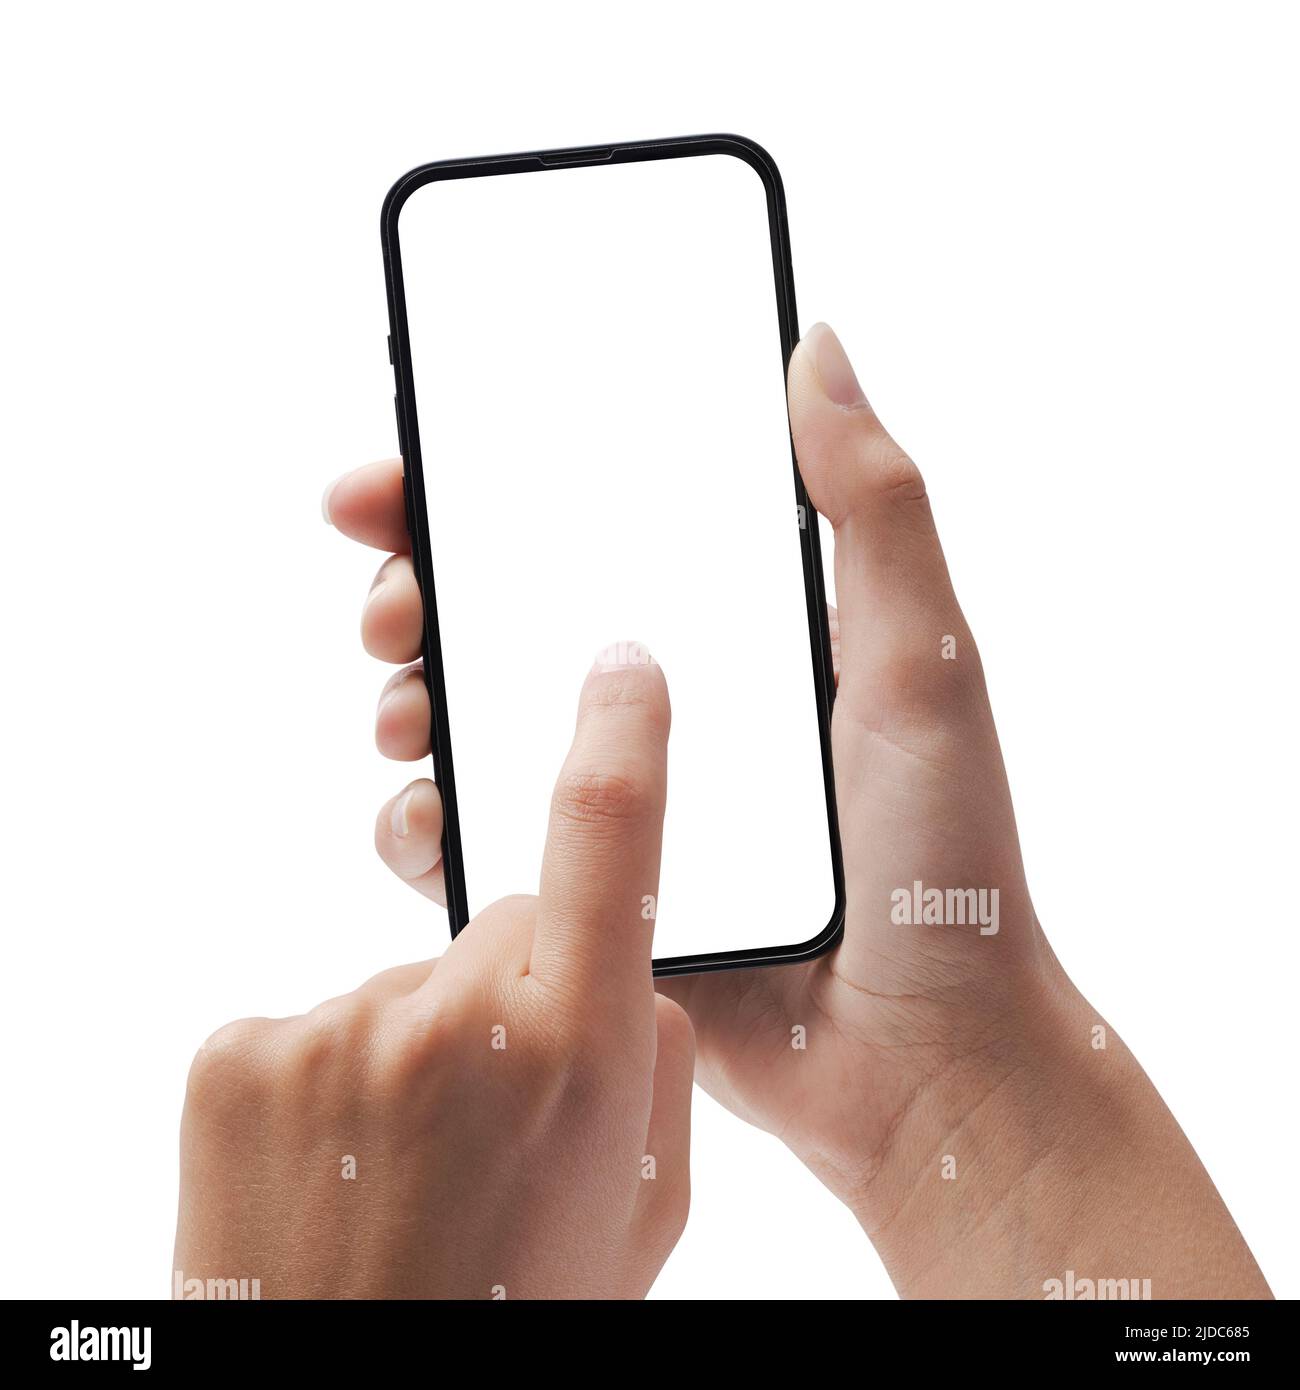 Woman holding a smartphone and tapping on the blank screen,on white background Stock Photo